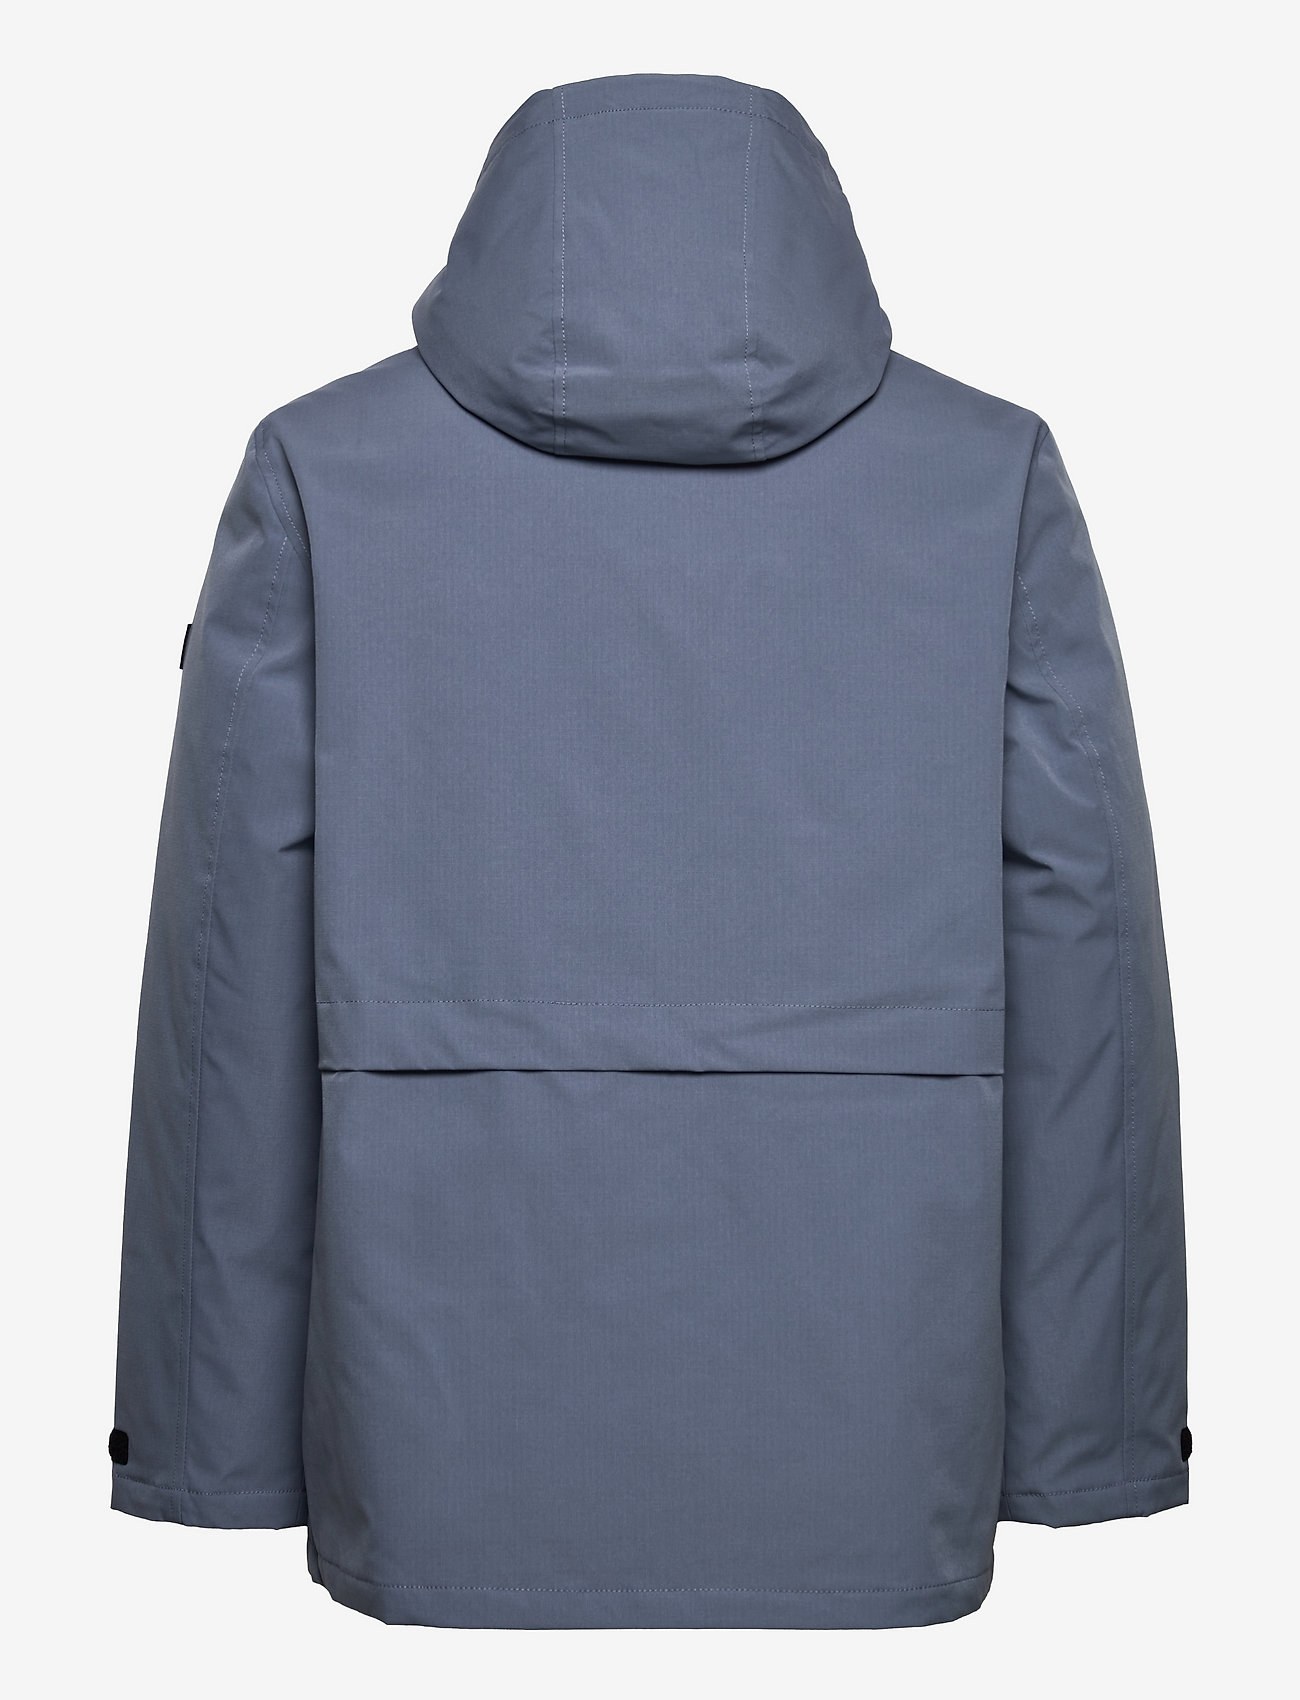 Esprit Casual - Recycled: jacket with down filling - kurtki zimowe - grey blue - 1